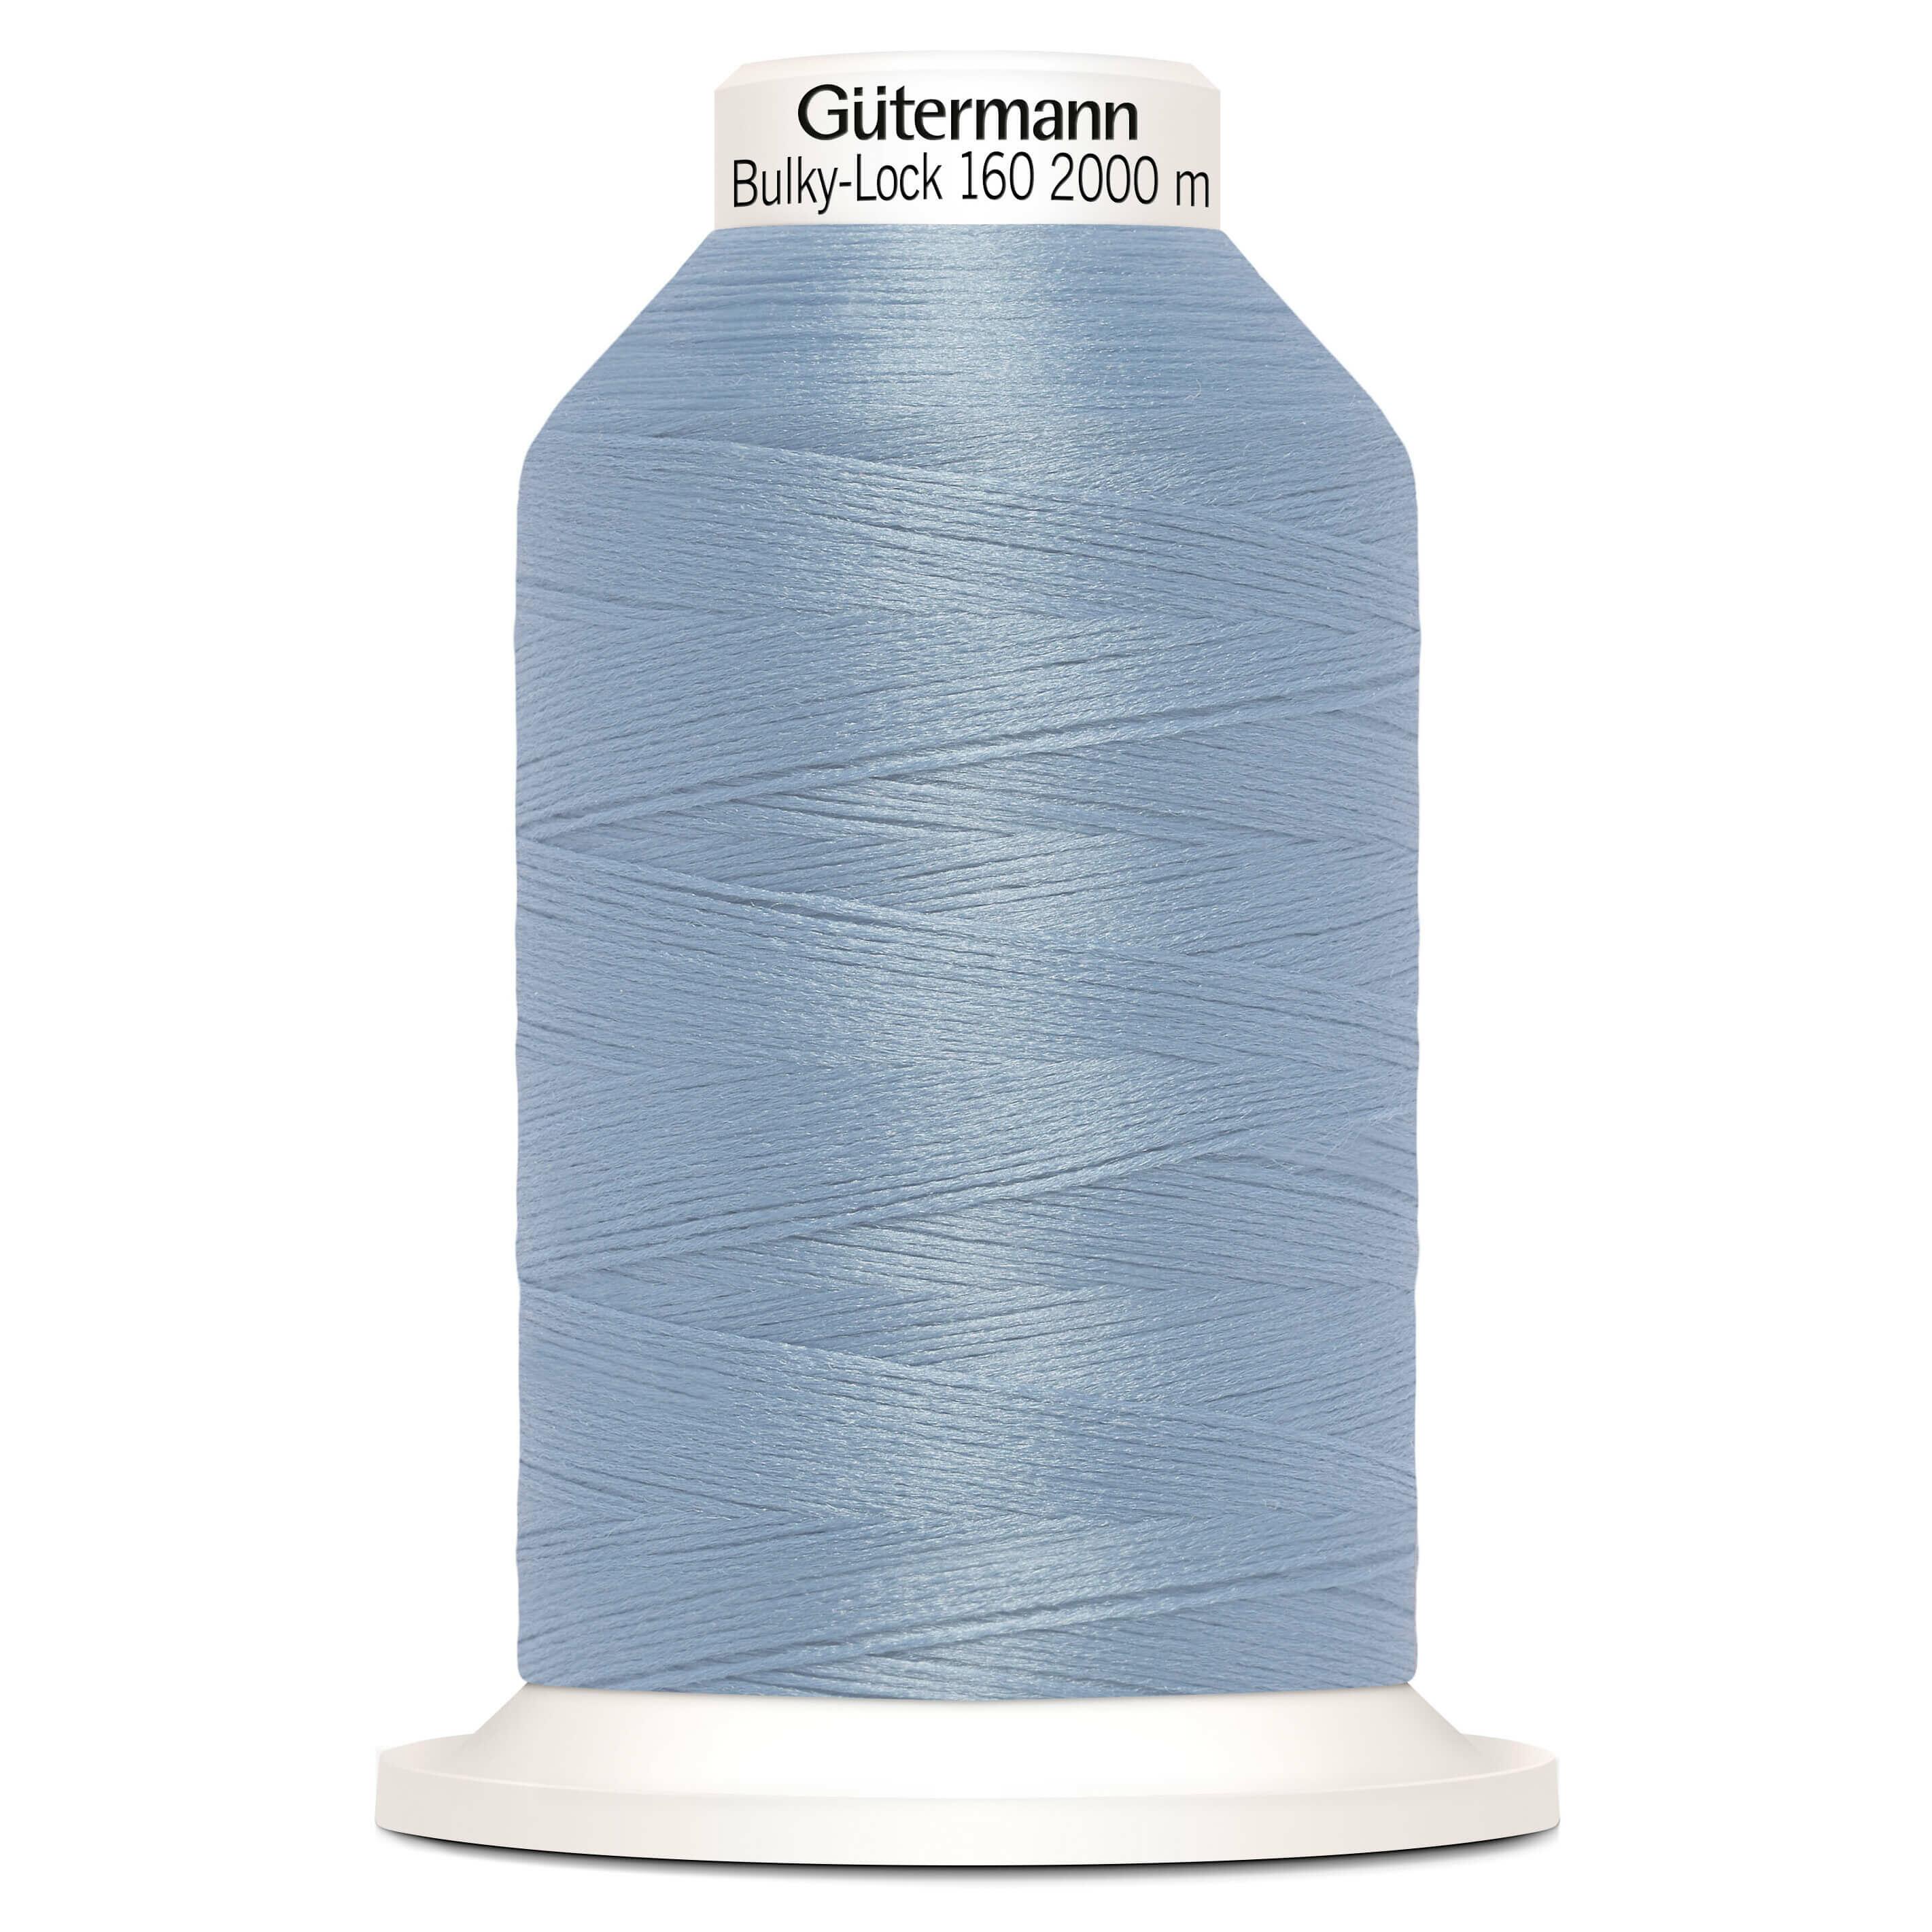 Gutermann Bulky-lock 160 2000m overlocking thread in colour number 143 Baby Blue